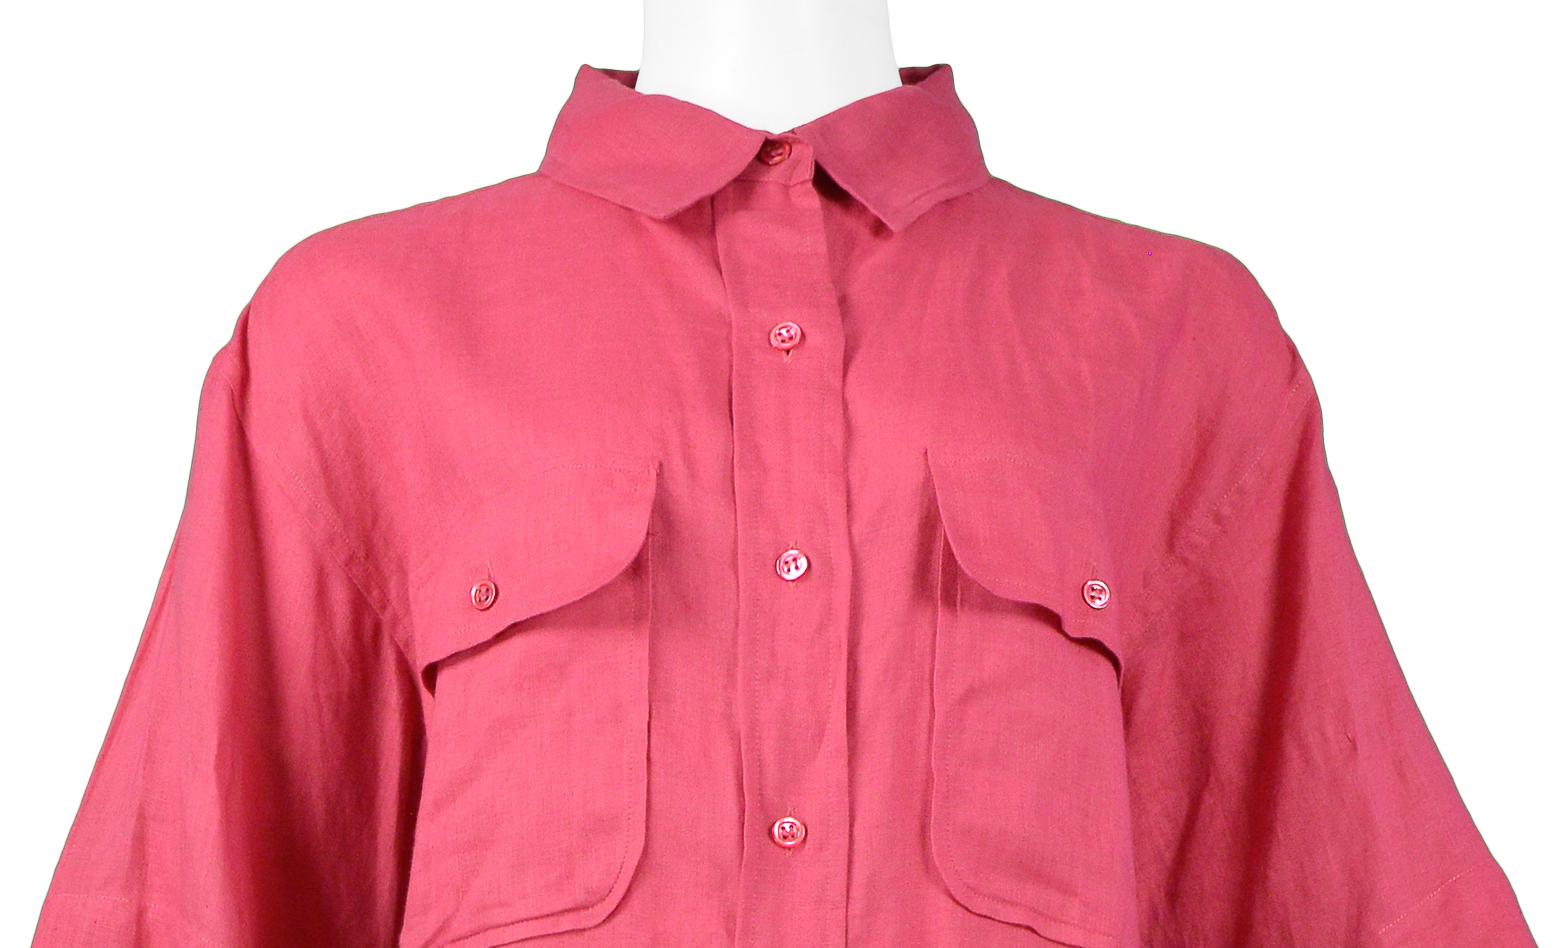 Yves Saint Laurent YSL Pink Linen Safari Shirt In Excellent Condition For Sale In Los Angeles, CA